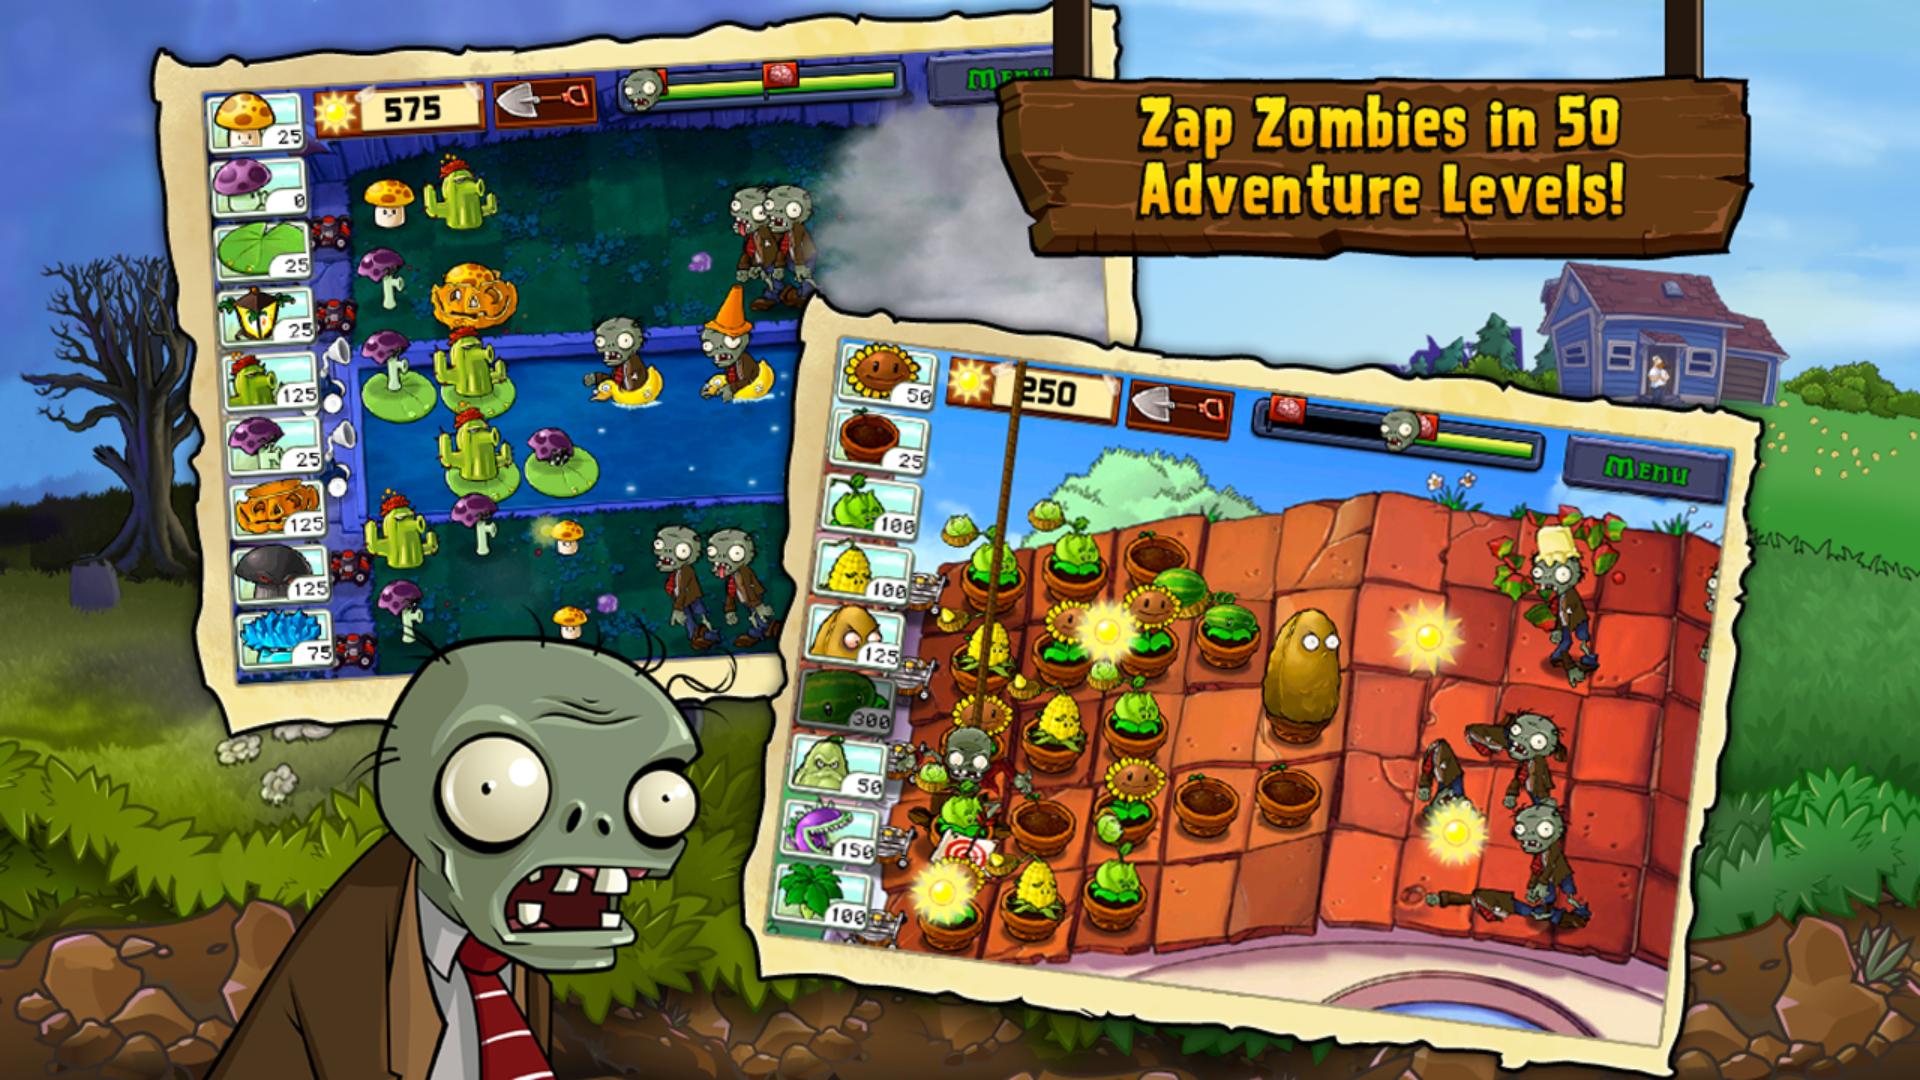 Best zombie games: Plants vs Zombies. Image show a zombie in front of gameplay shots.